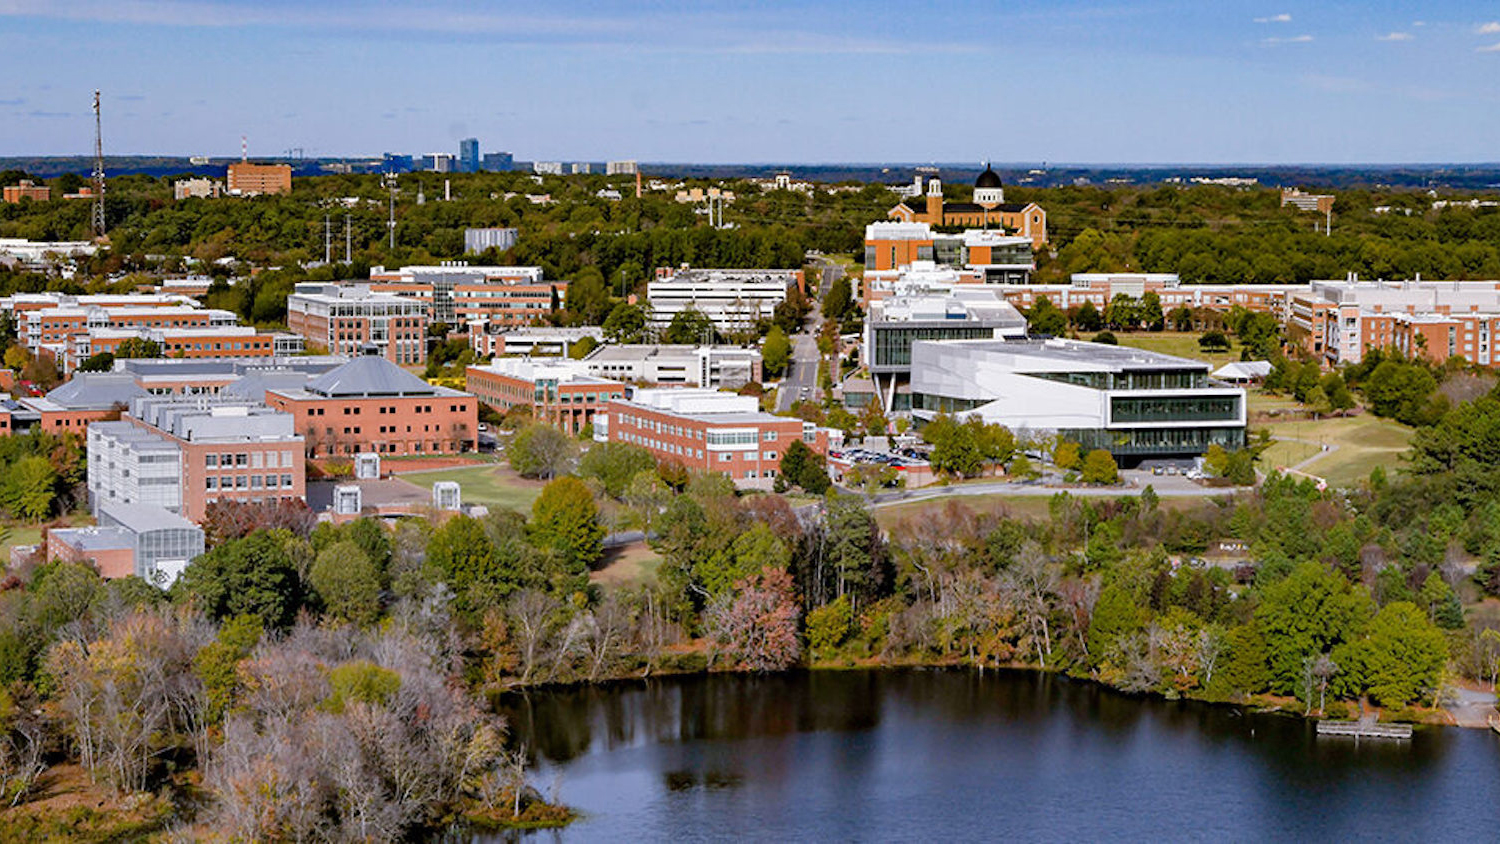 Centennial Campus as seen from over Lake Raleigh